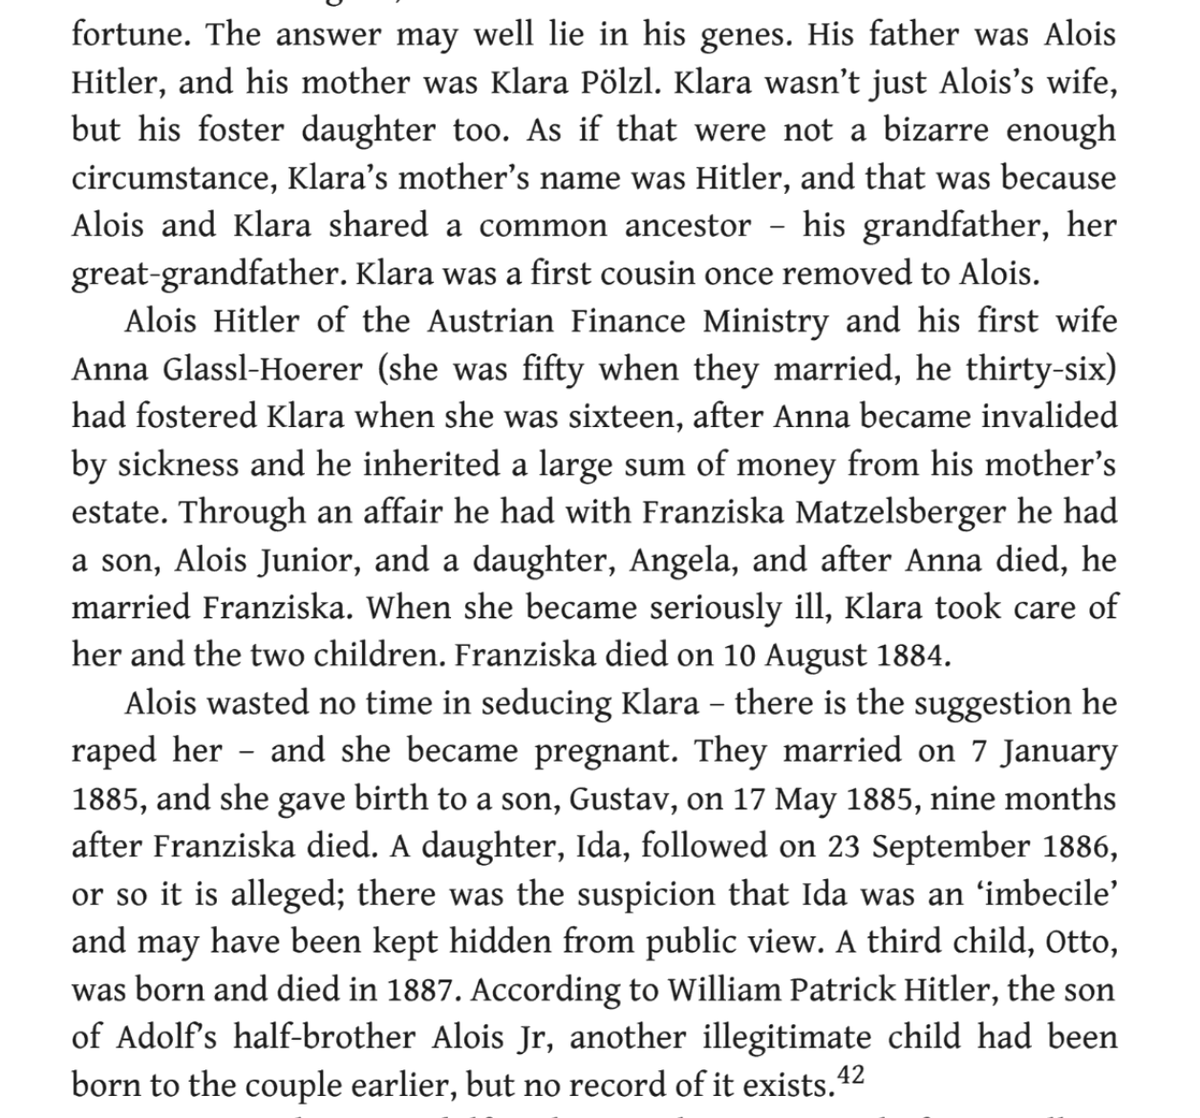 The same year Alois changed his name, 16 y/o Klara Polzl came to live with him and his wife Anna. Klara and Alois were 2nd cousins, and he took her in as a foster daughter.Supposedly, the inheritance he received that year came from the death of his Uncle (Klara’s Grandfather).